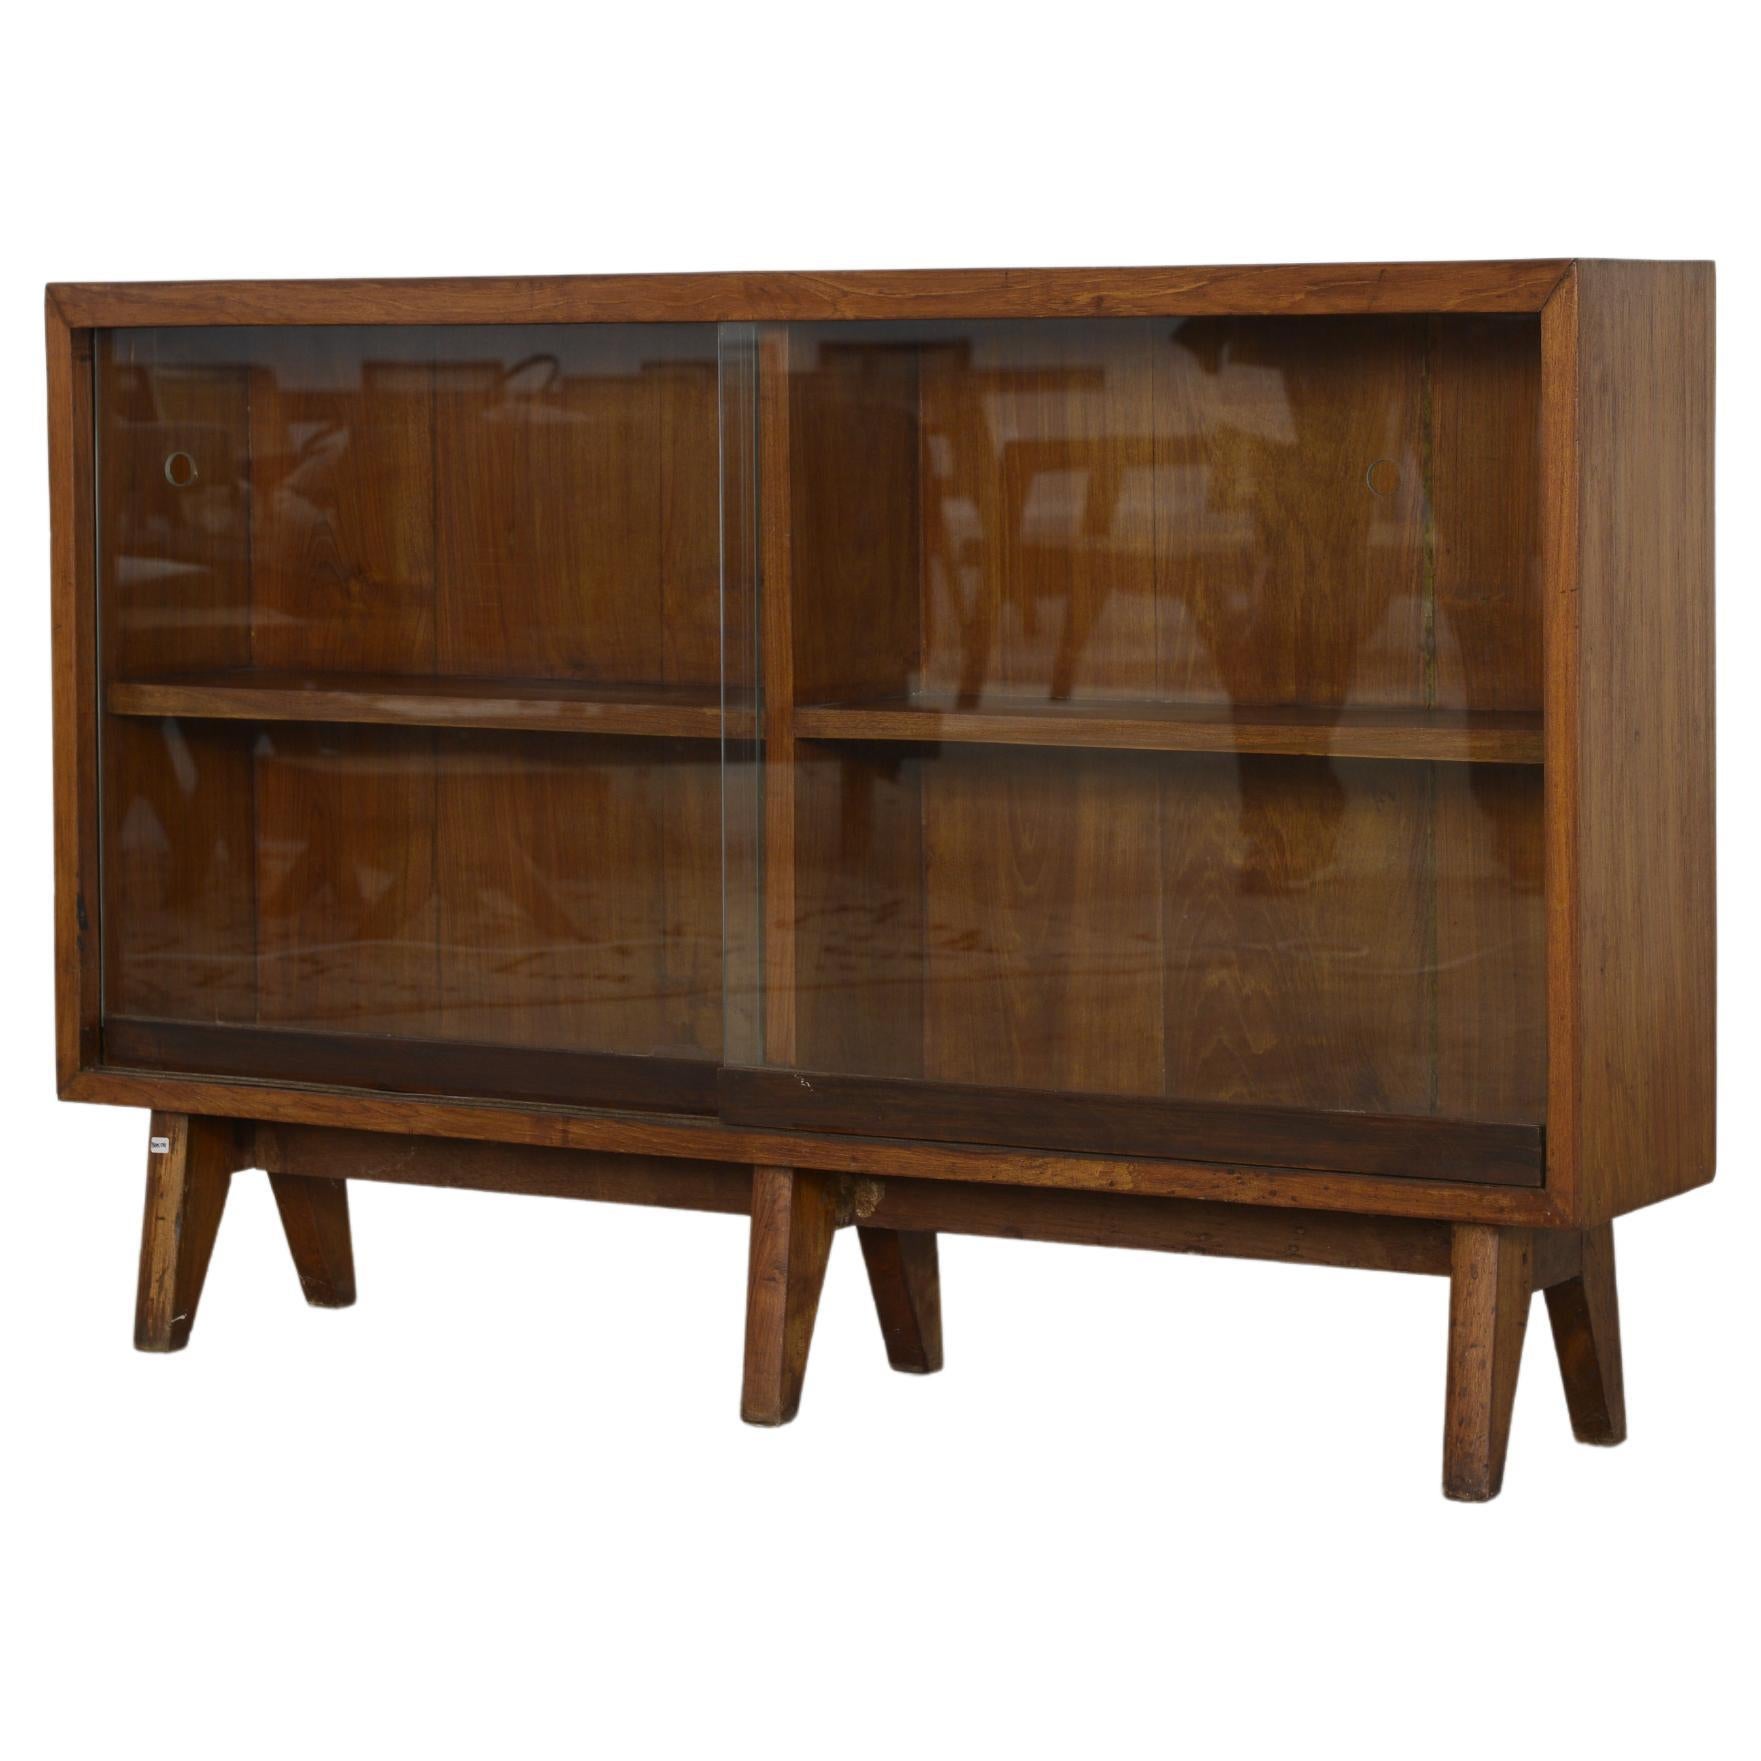 This glass-fronted bookcase is an iconic design piece. It is raw in its simplicity it shows a slightly patinated material. It's shape is beautifully fragile and has a wonderful color. We don't restore them too much. So we keep as much as possible of